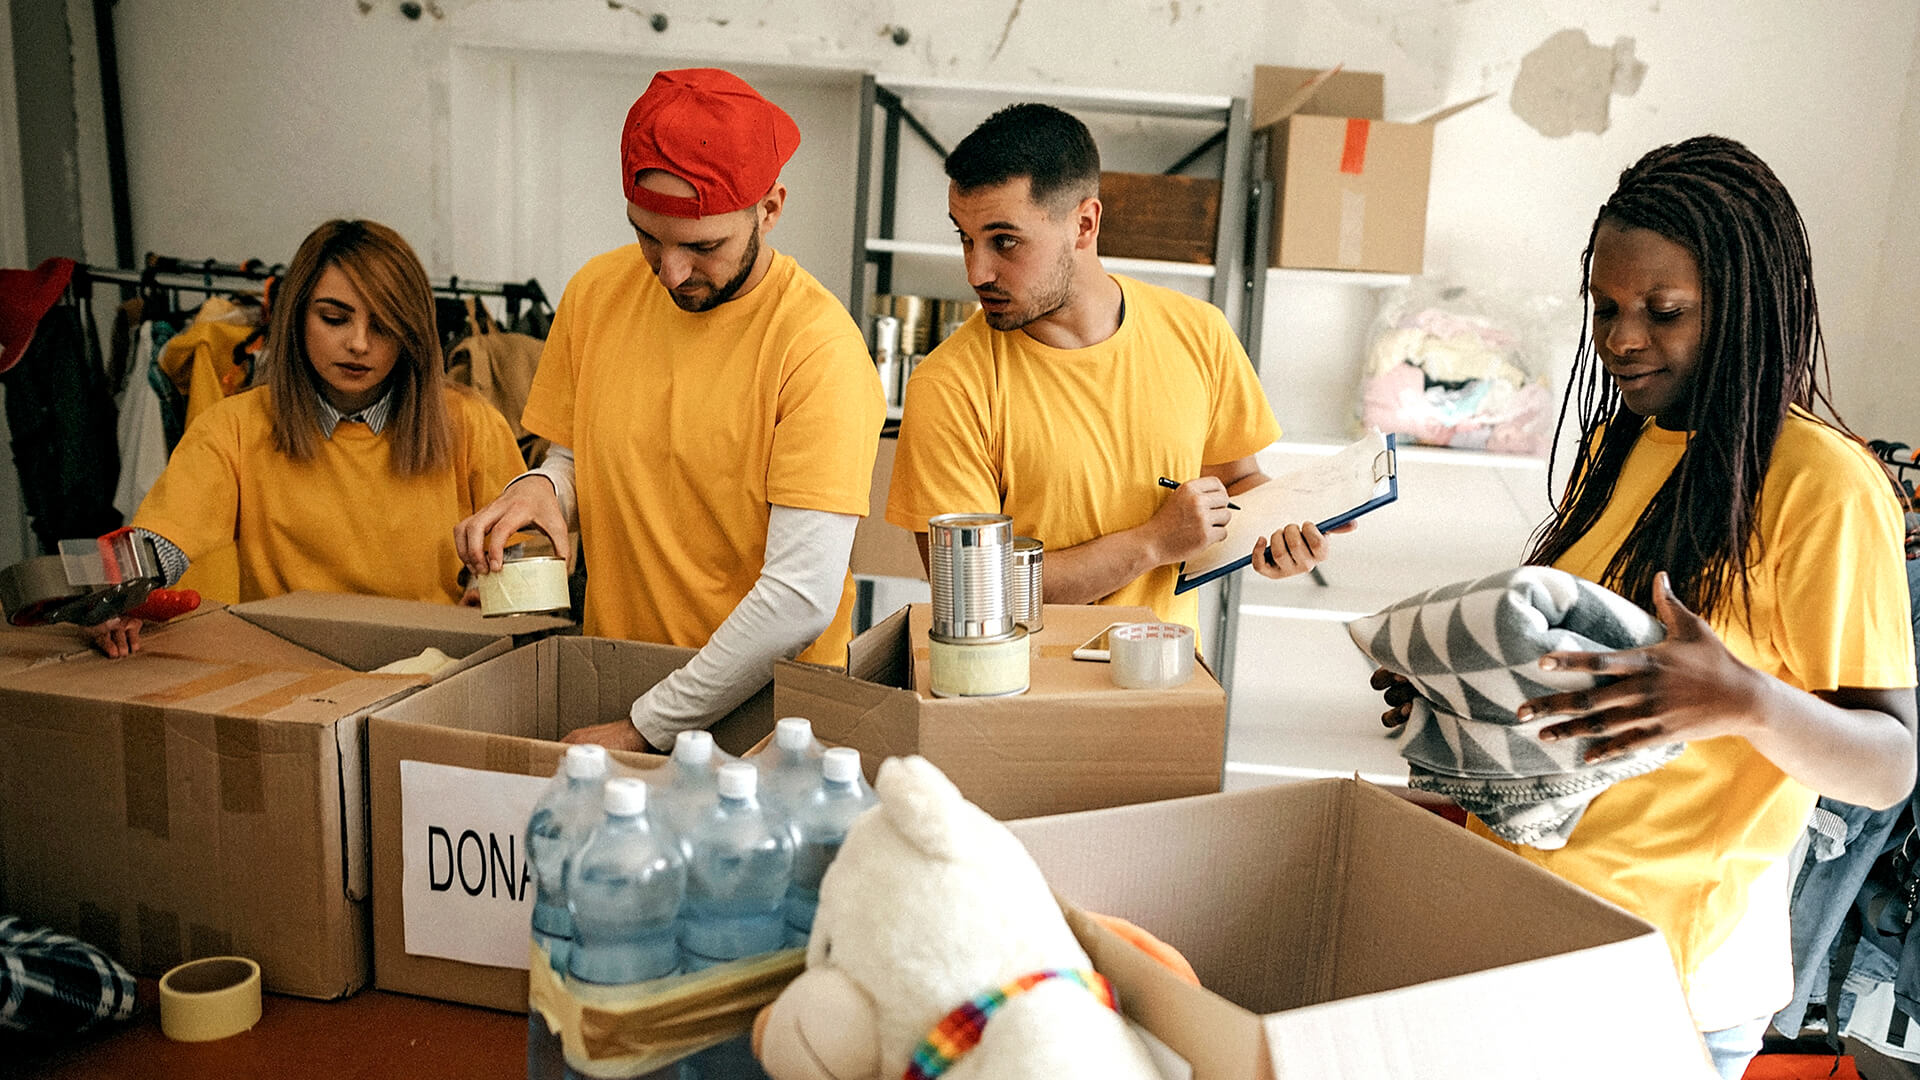 A group of volunteers wearing yellow shirts working at a donation center